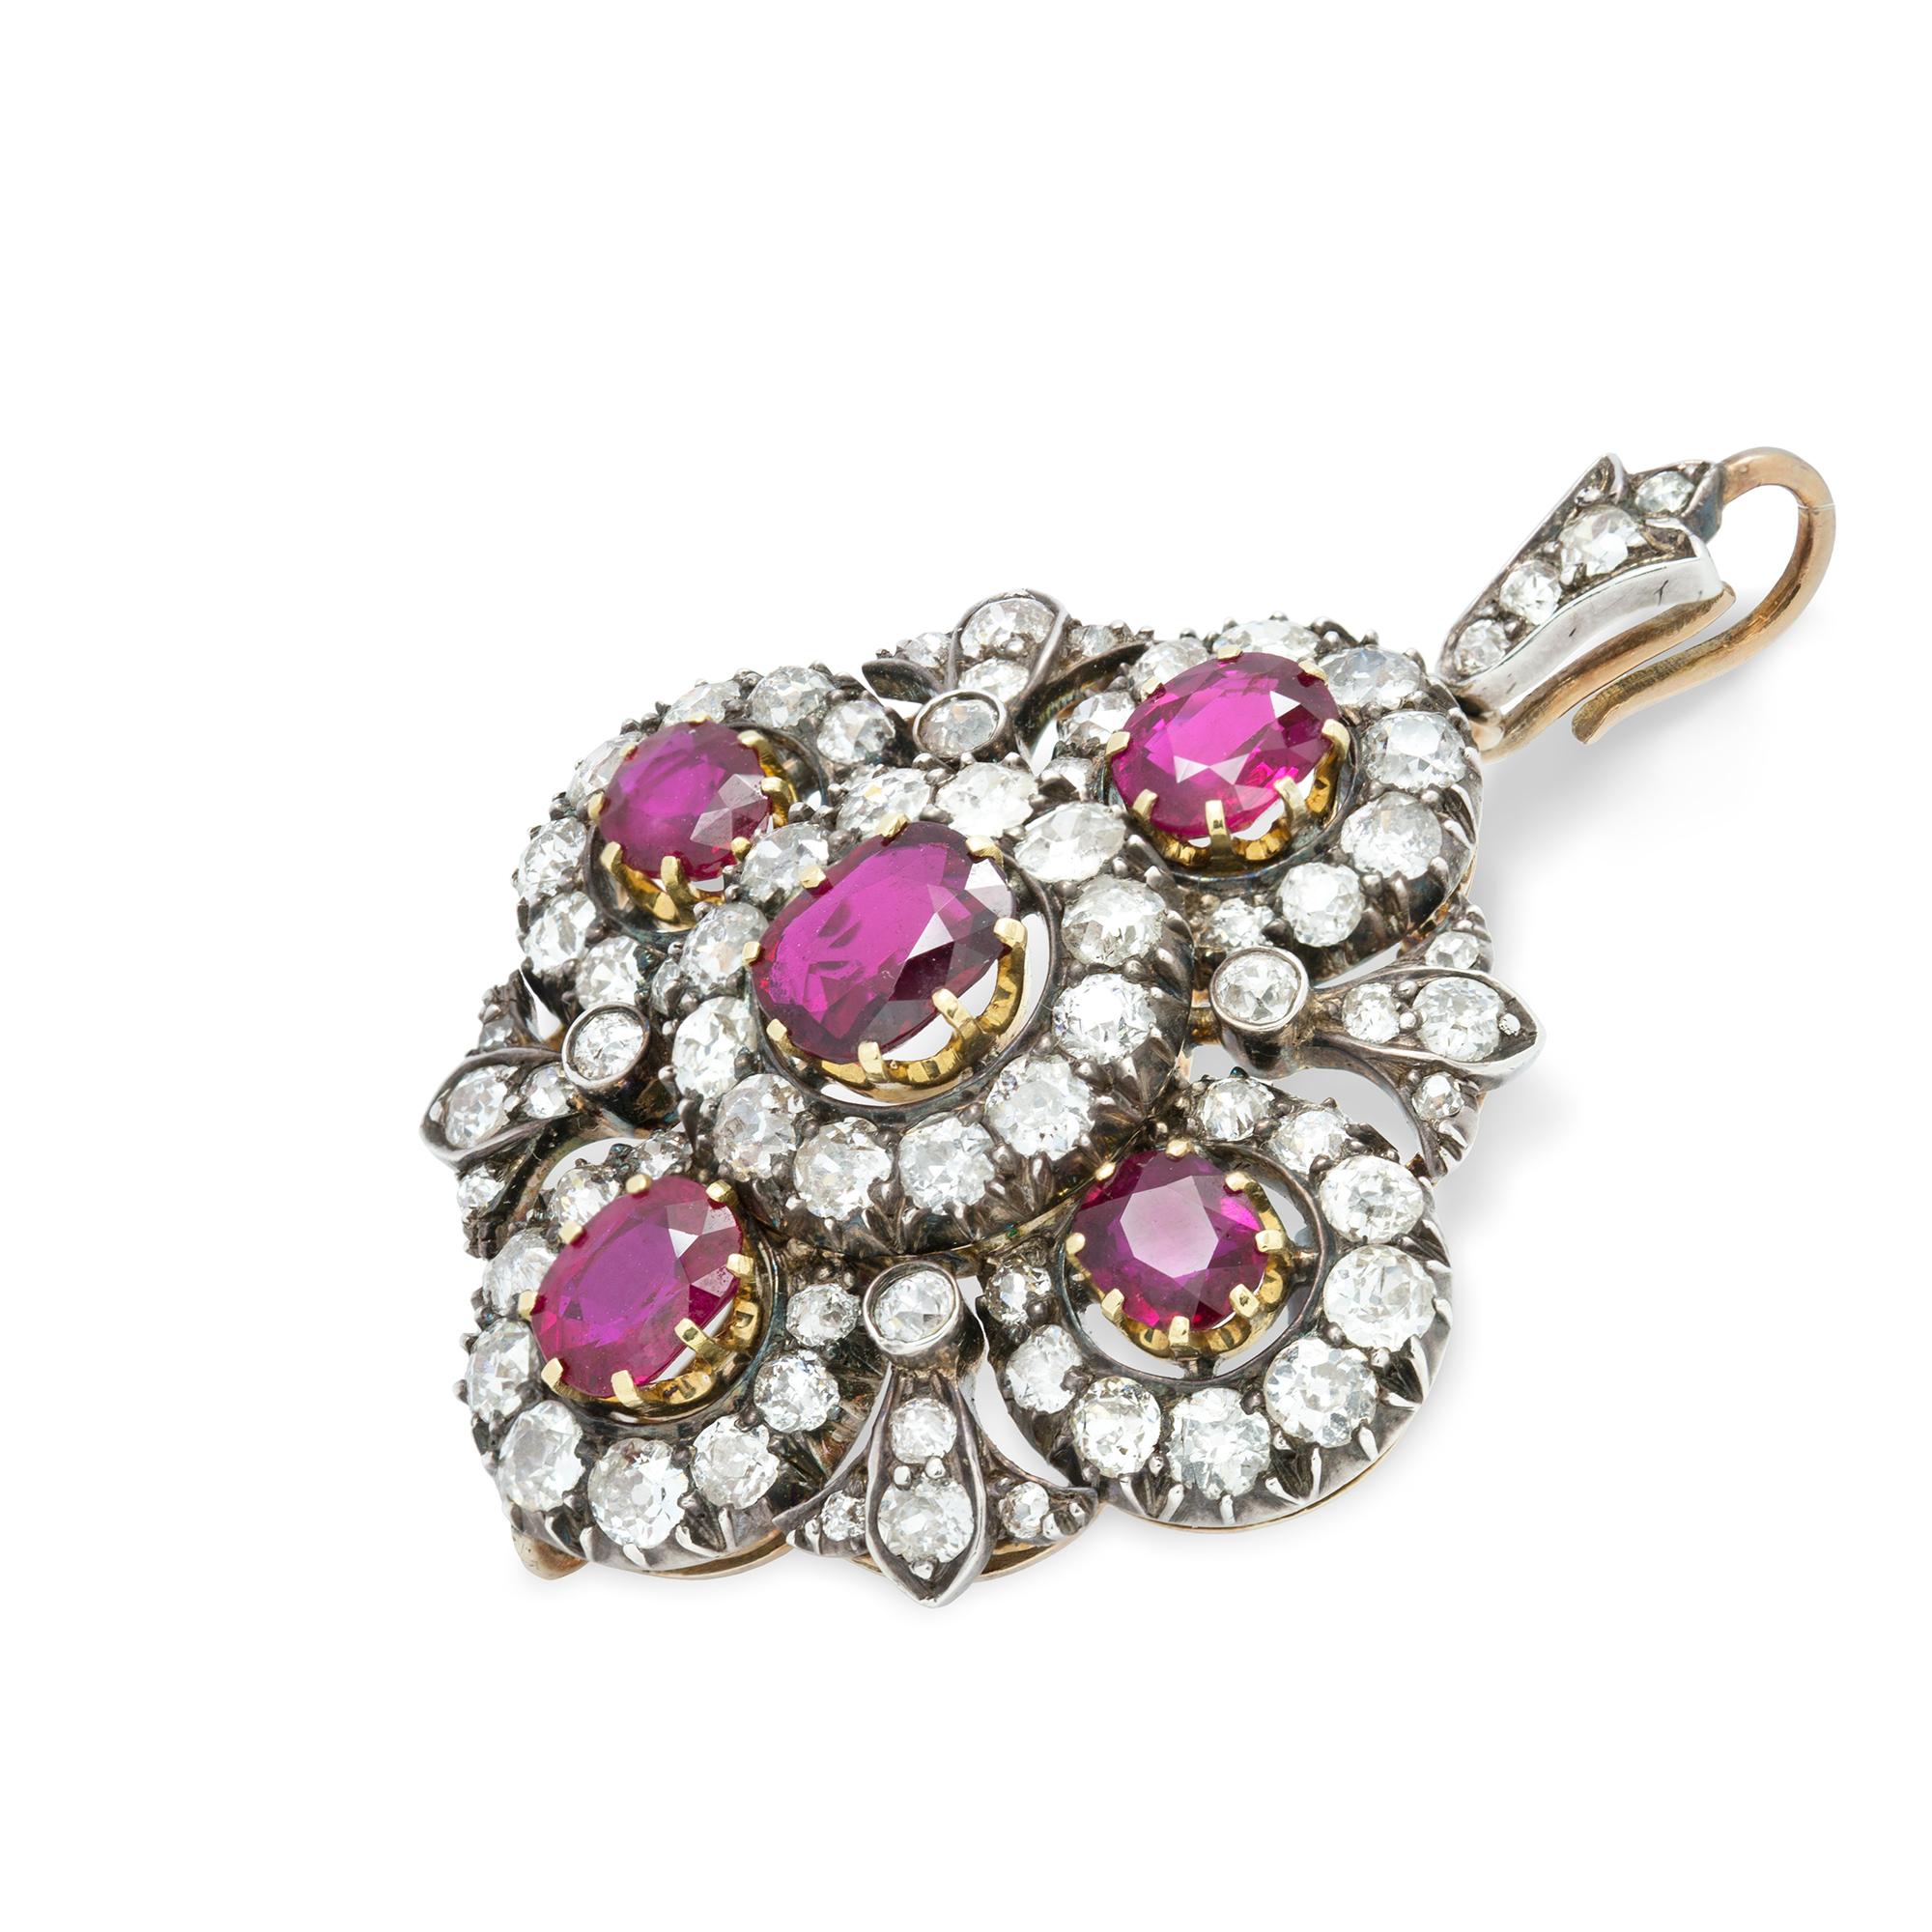 A Victorian ruby and diamond cross pendant brooch, the central cushion-cut ruby weighing 1.02 carats, surrounded by a cluster of old-cut diamonds, the arms set with four oval faceted rubies with total weight of 3.11 carats, all surrounded by old-cut